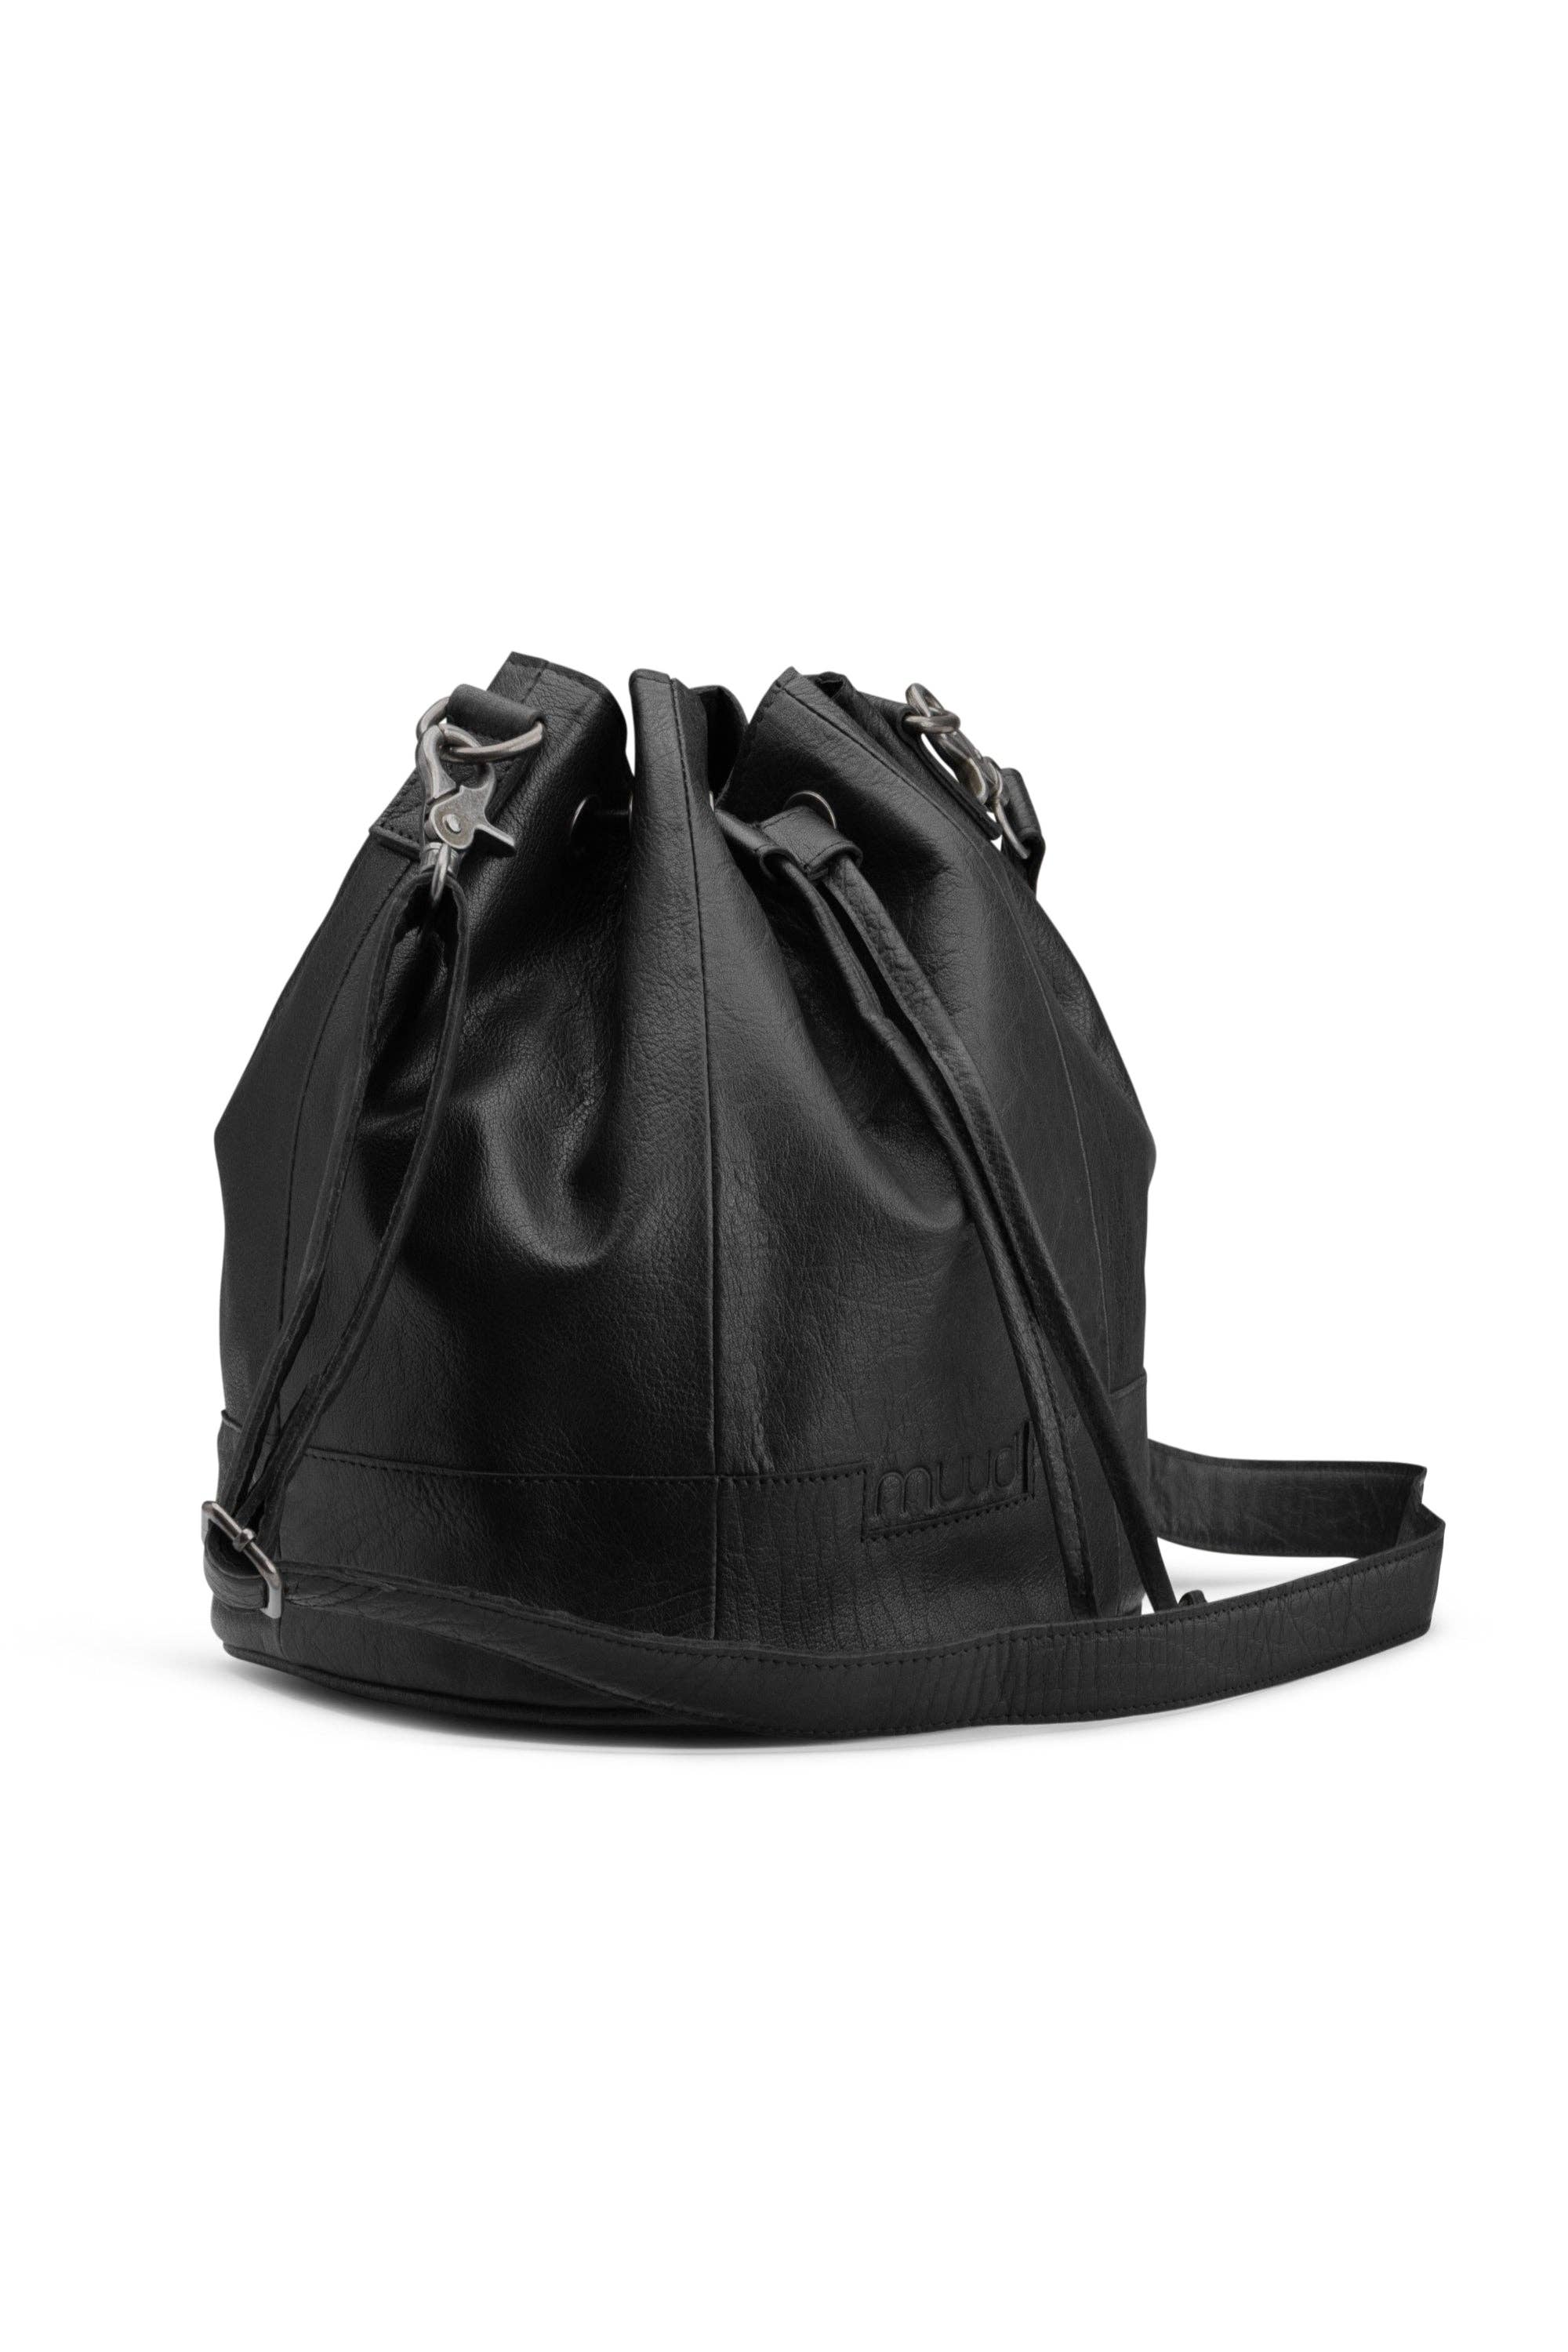 muud - Donna Leather Project Bag